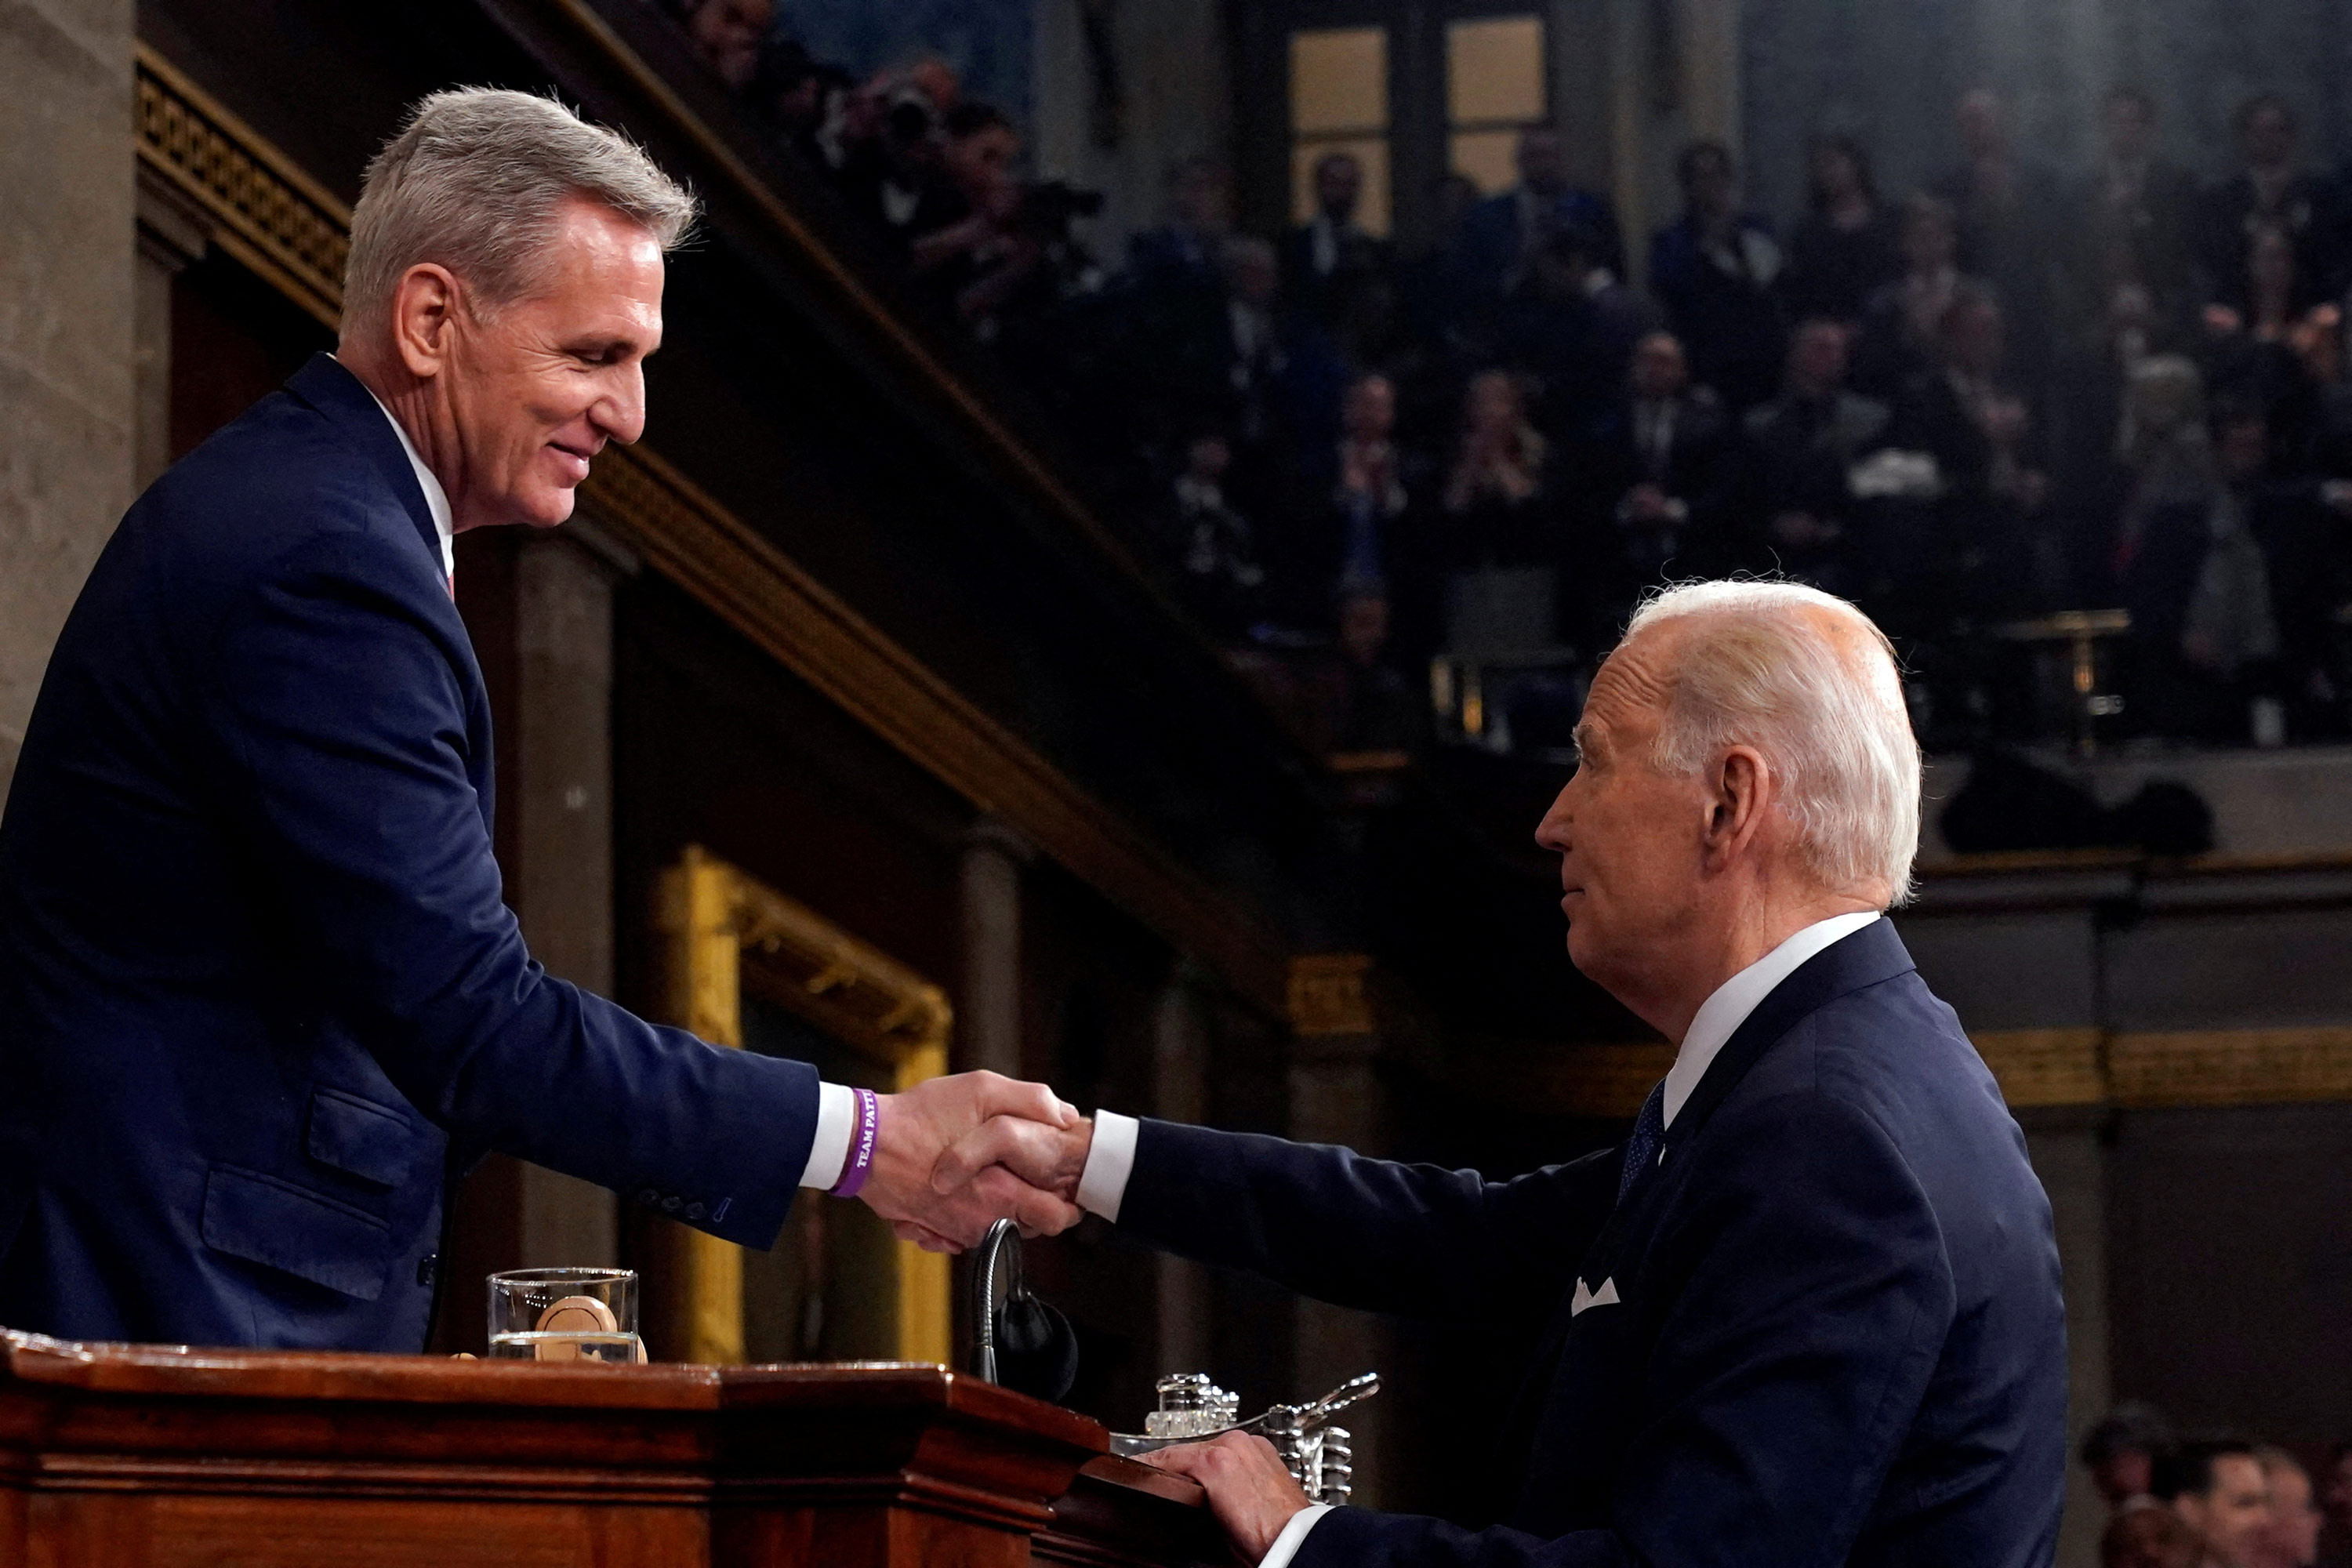 U.S. President Joe Biden shakes hands with U.S. House Speaker Kevin McCarthy after the State of the Union address to a joint session of Congress at the Capitol on Feb. 7, 2023, in Washington, DC.